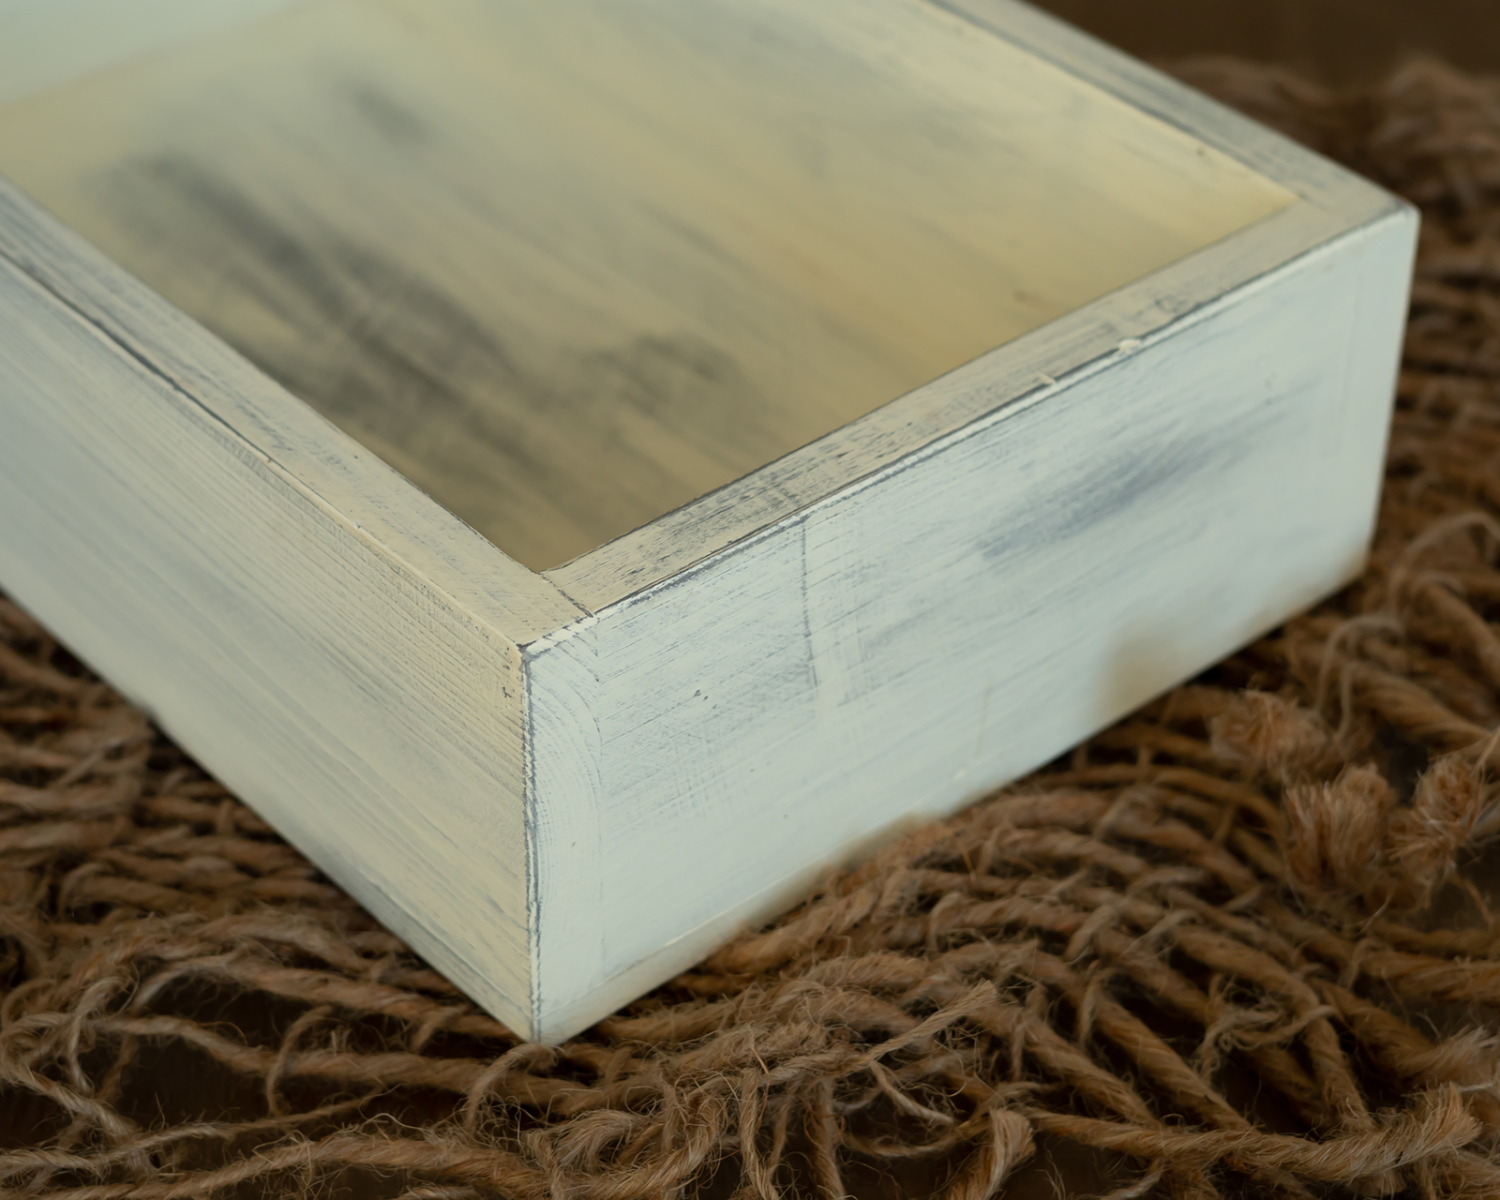 Antique white wooden crate